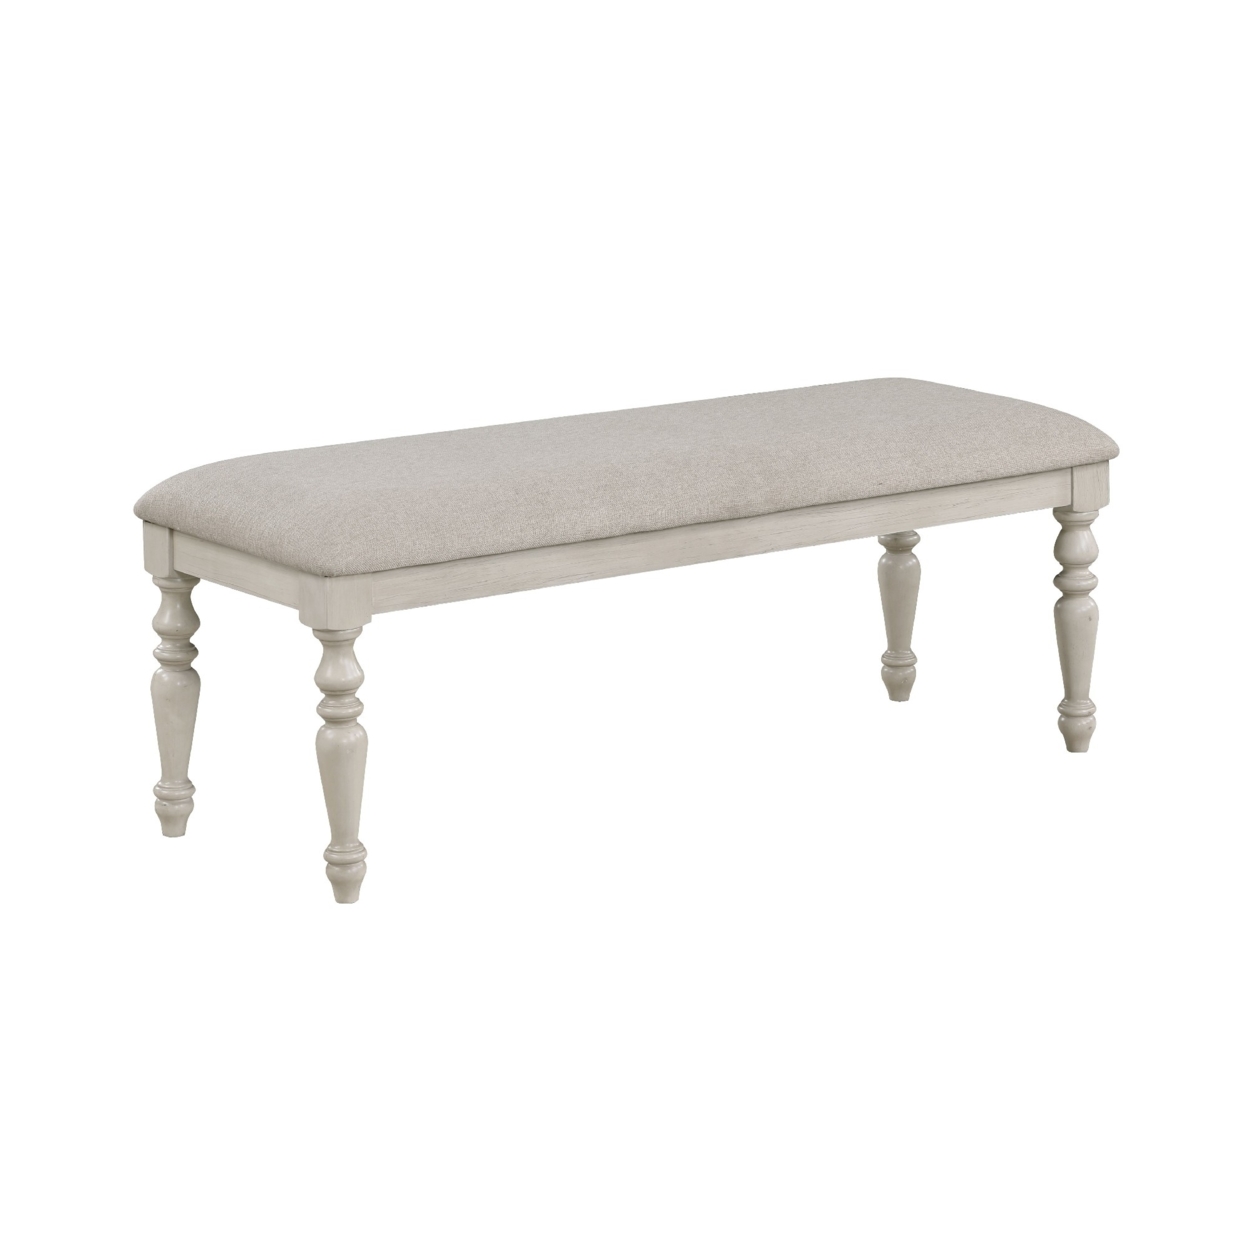 Katherine 48 Inch Bench With Fabric Seat And Turned Legs, White- Saltoro Sherpi